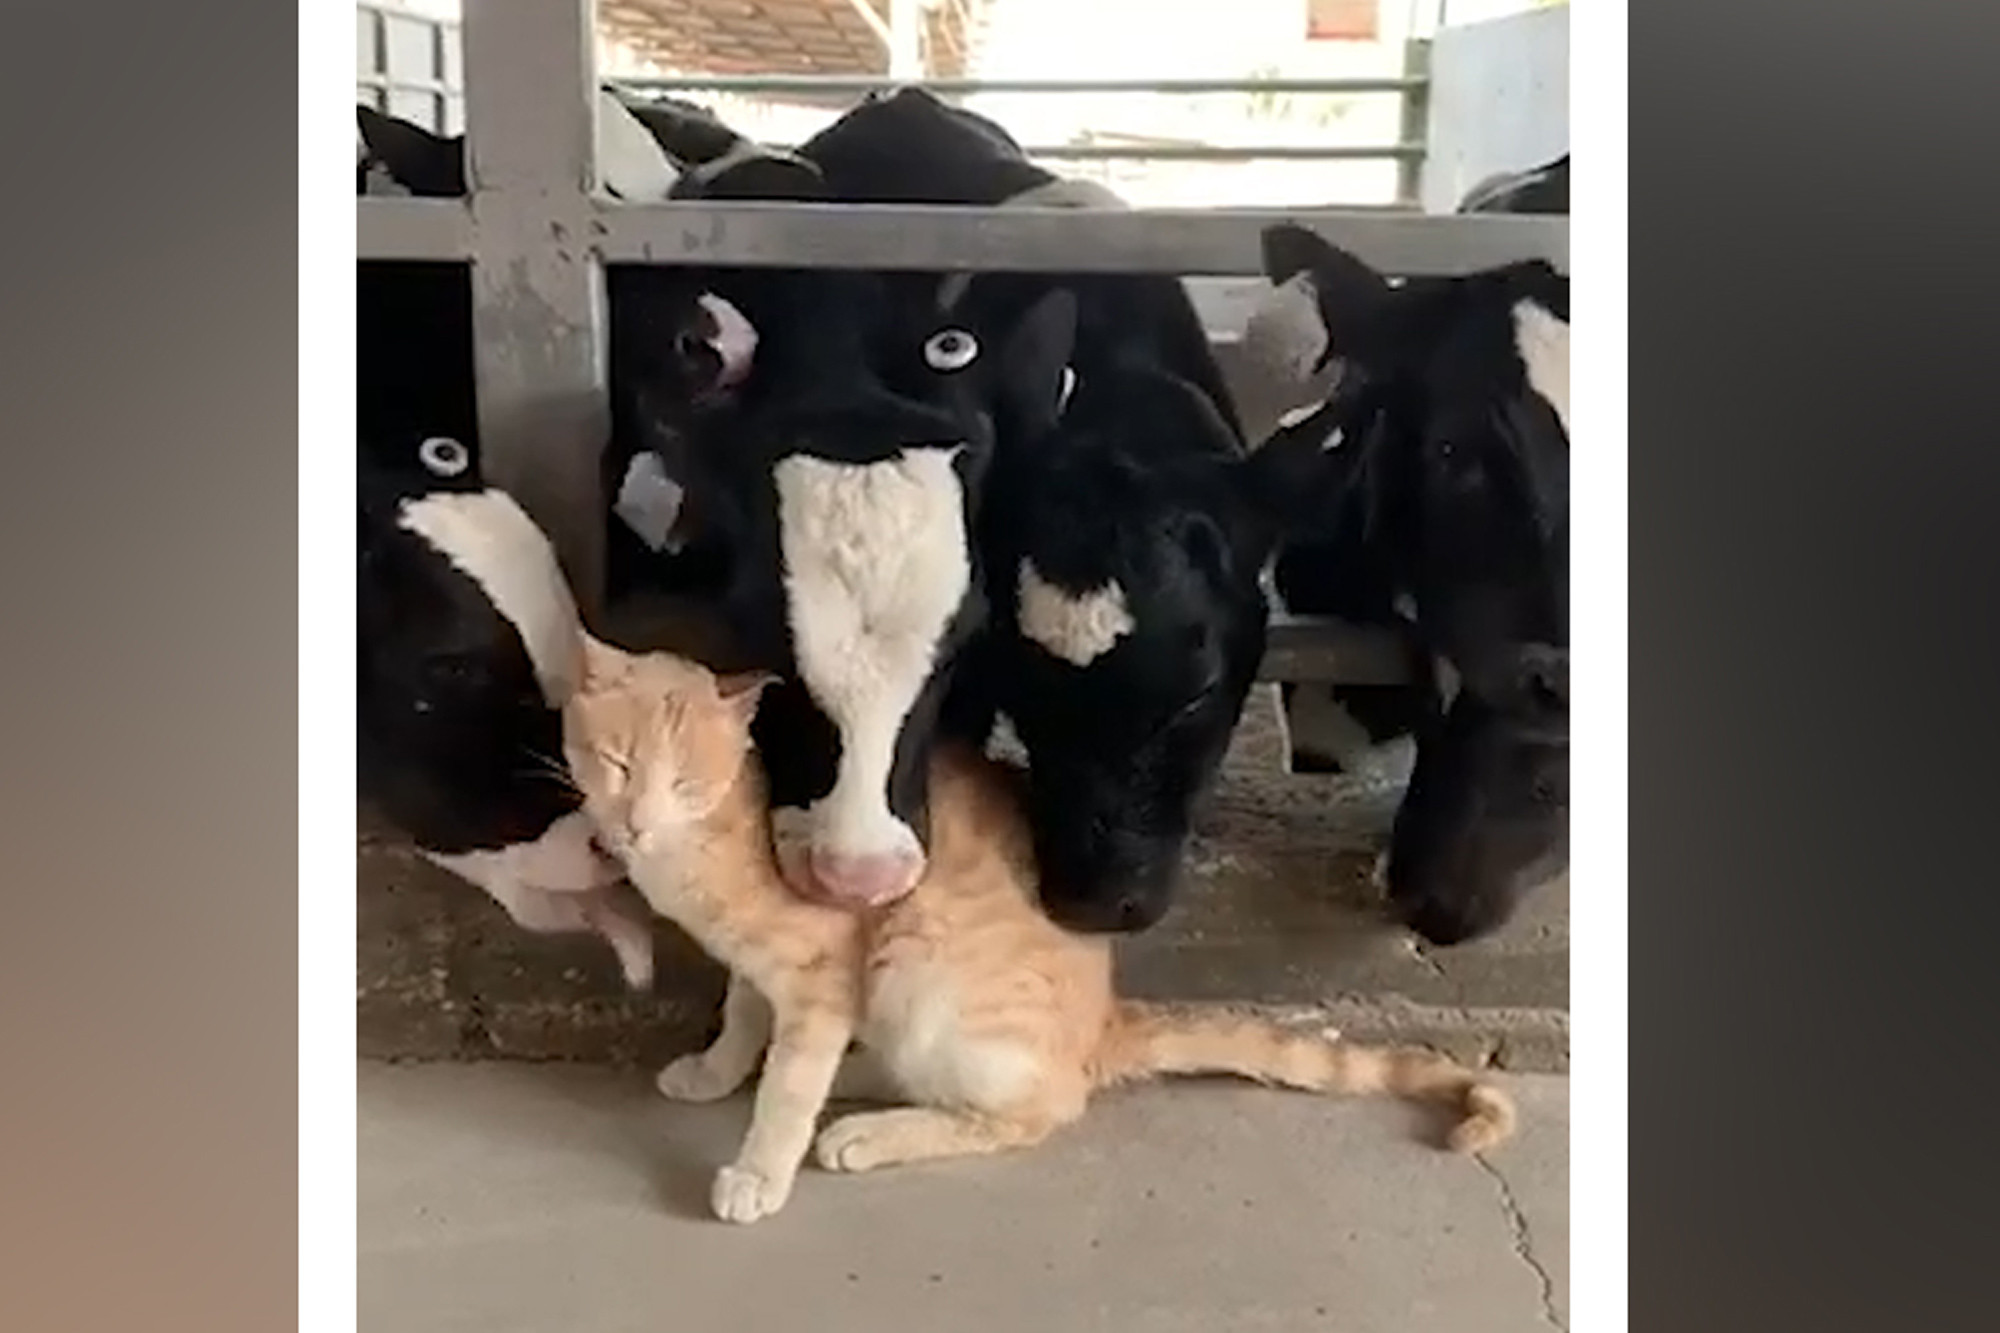 Cows licking cat is an interspecies tongue bath (Video) | New York Post